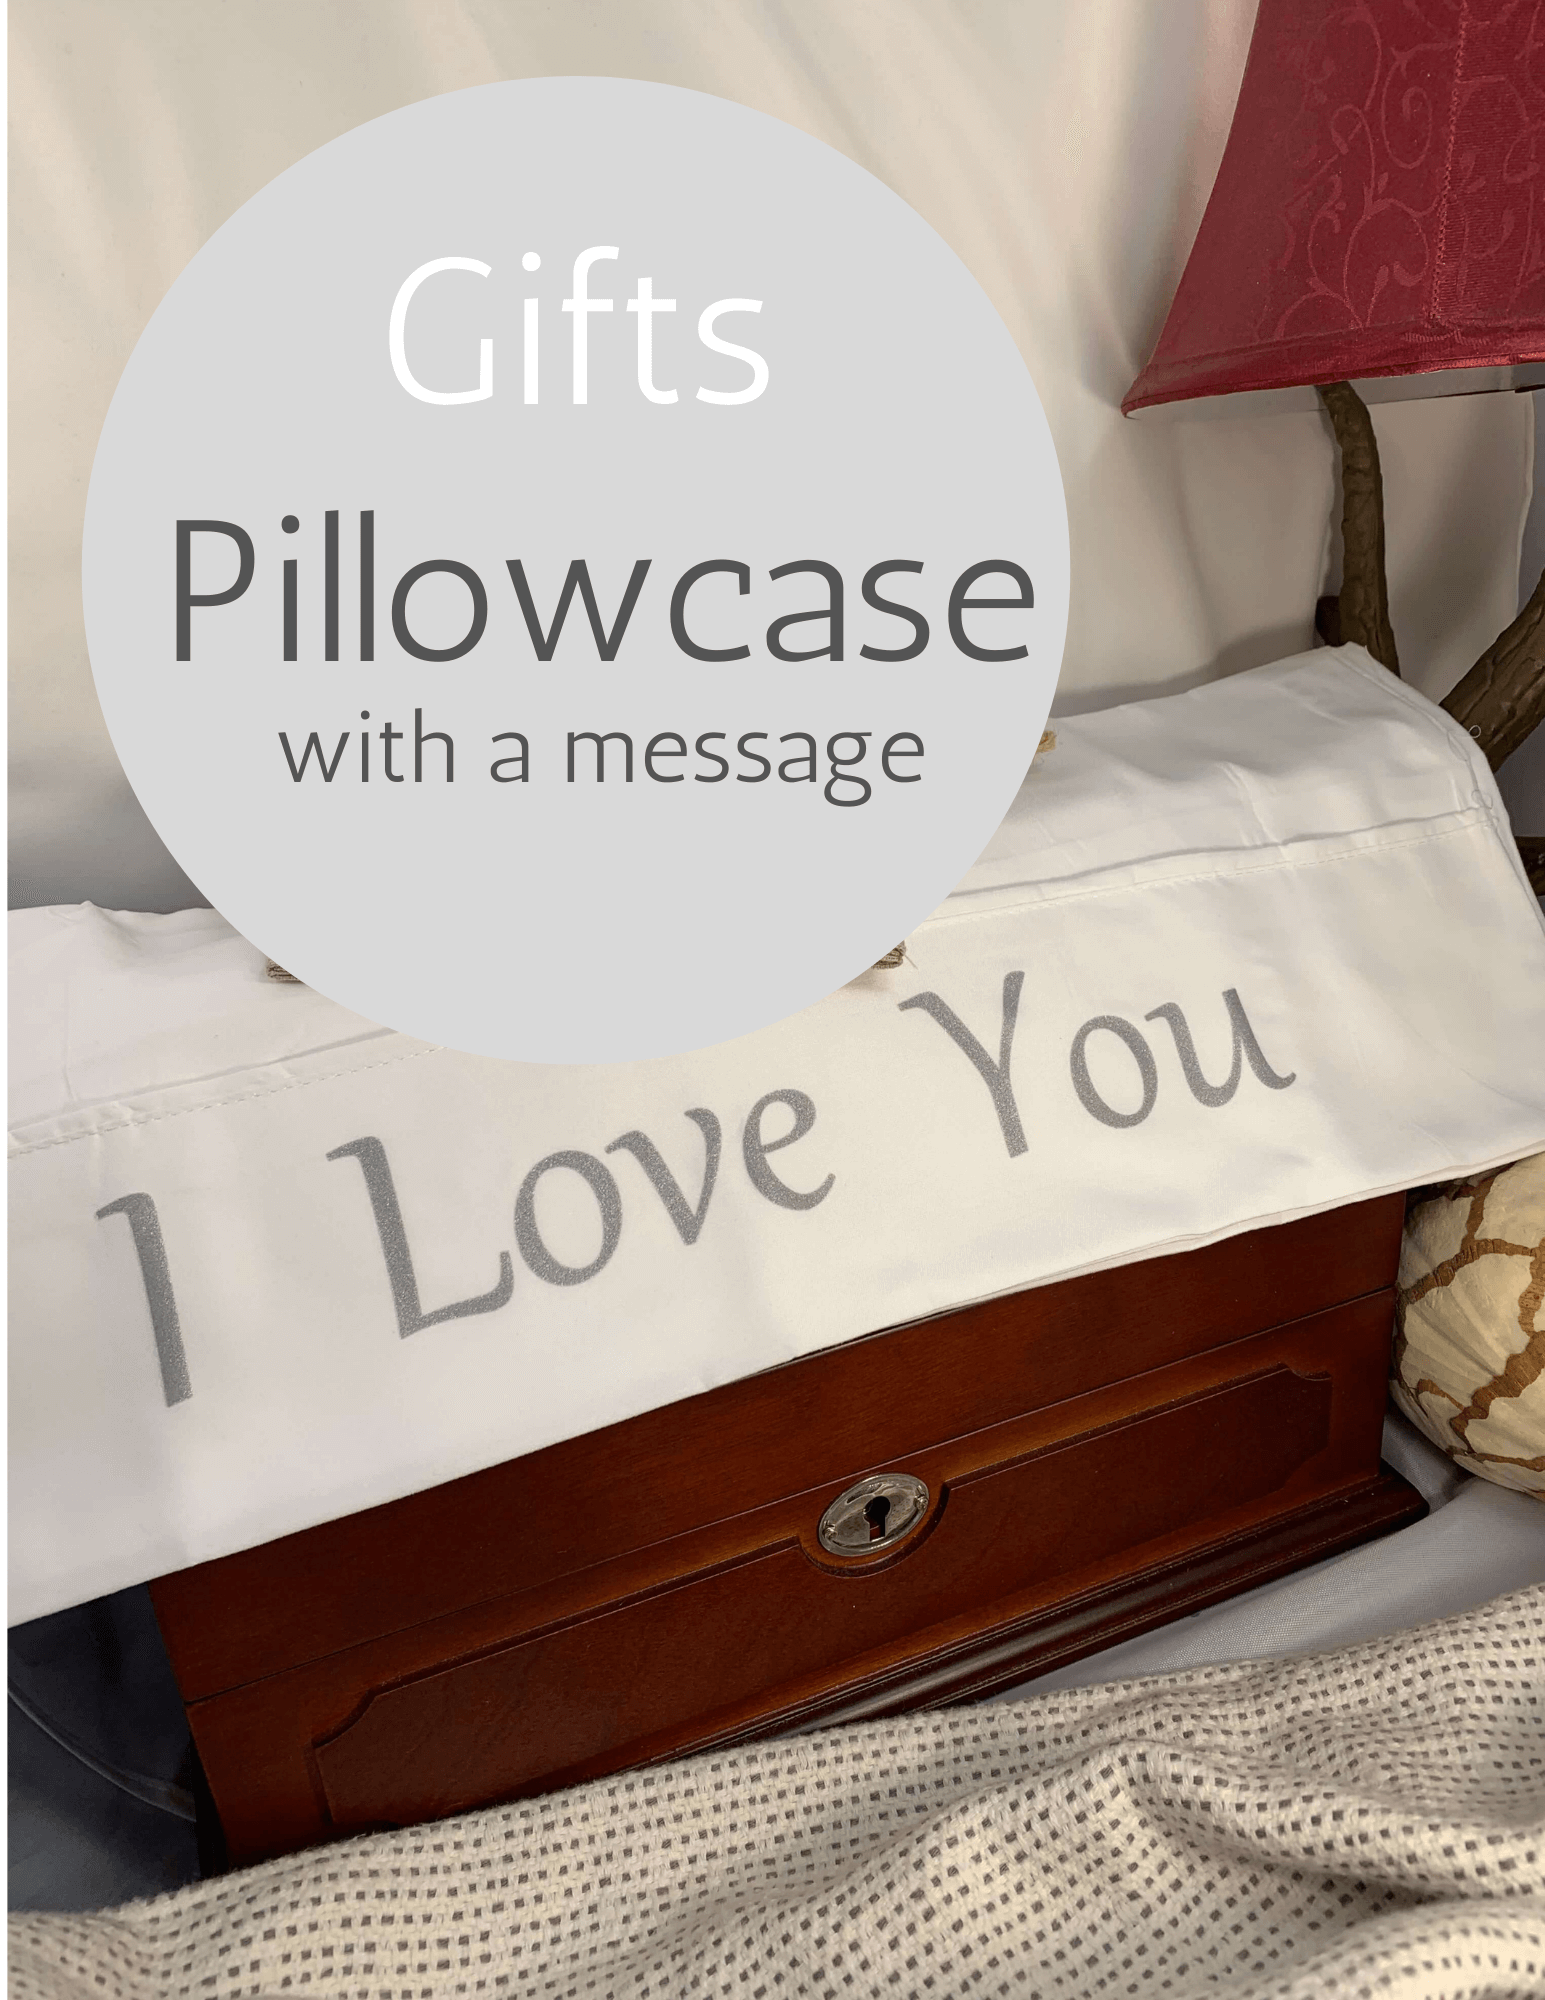 I Love You - Pillowcase with a Message